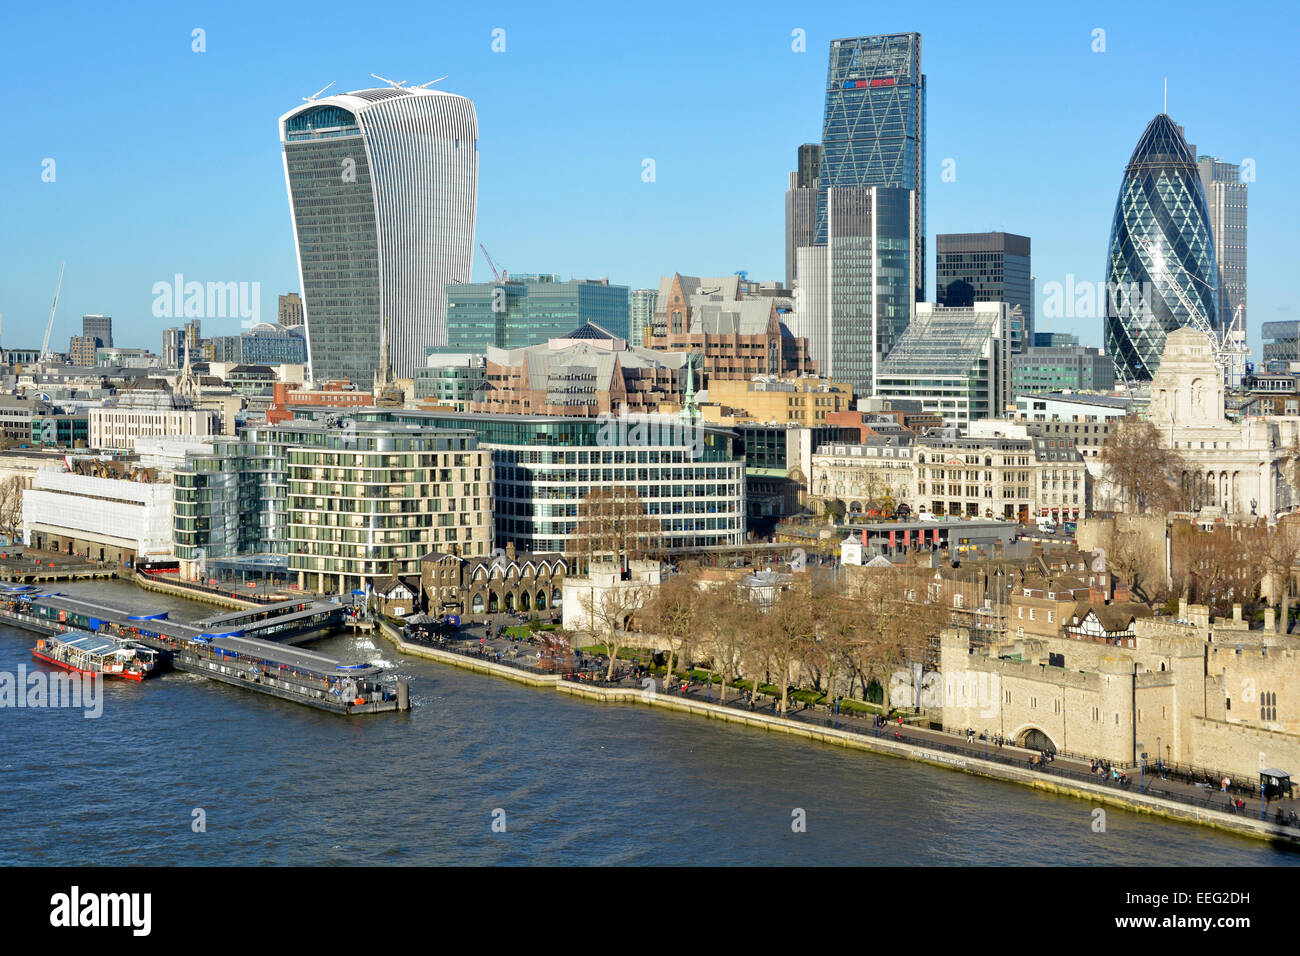 Tower Pier & River Thames with City of London skyline 